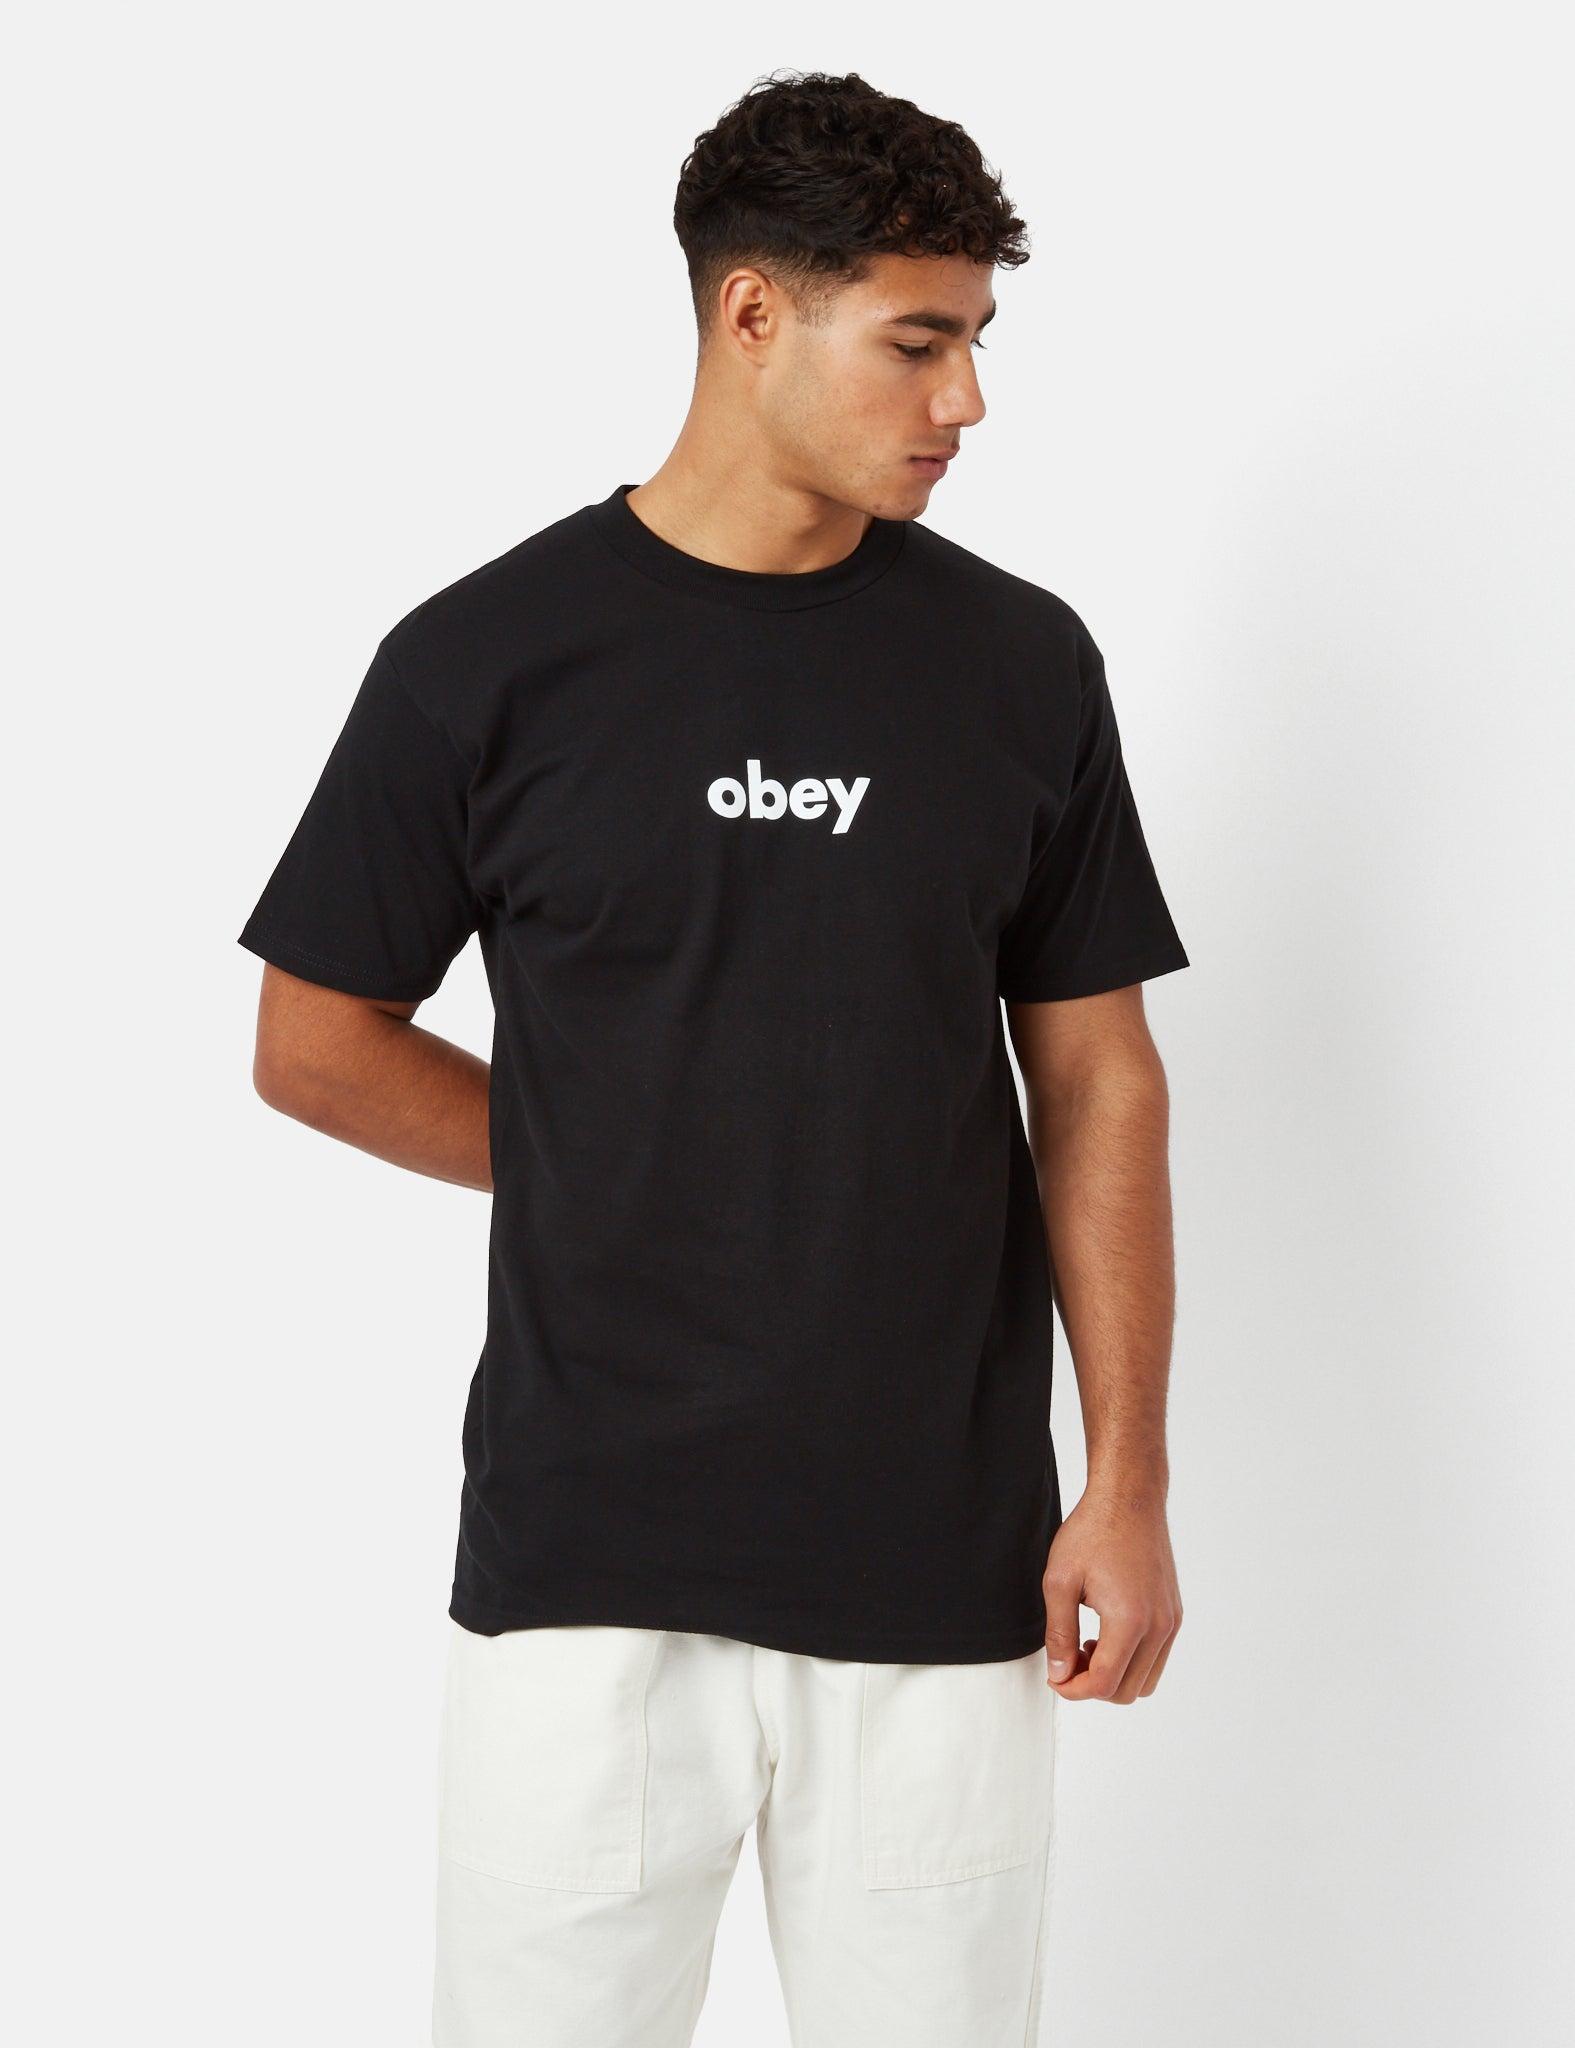 Obey Lower Case 2 Classic T-shirt in Black for Men | Lyst